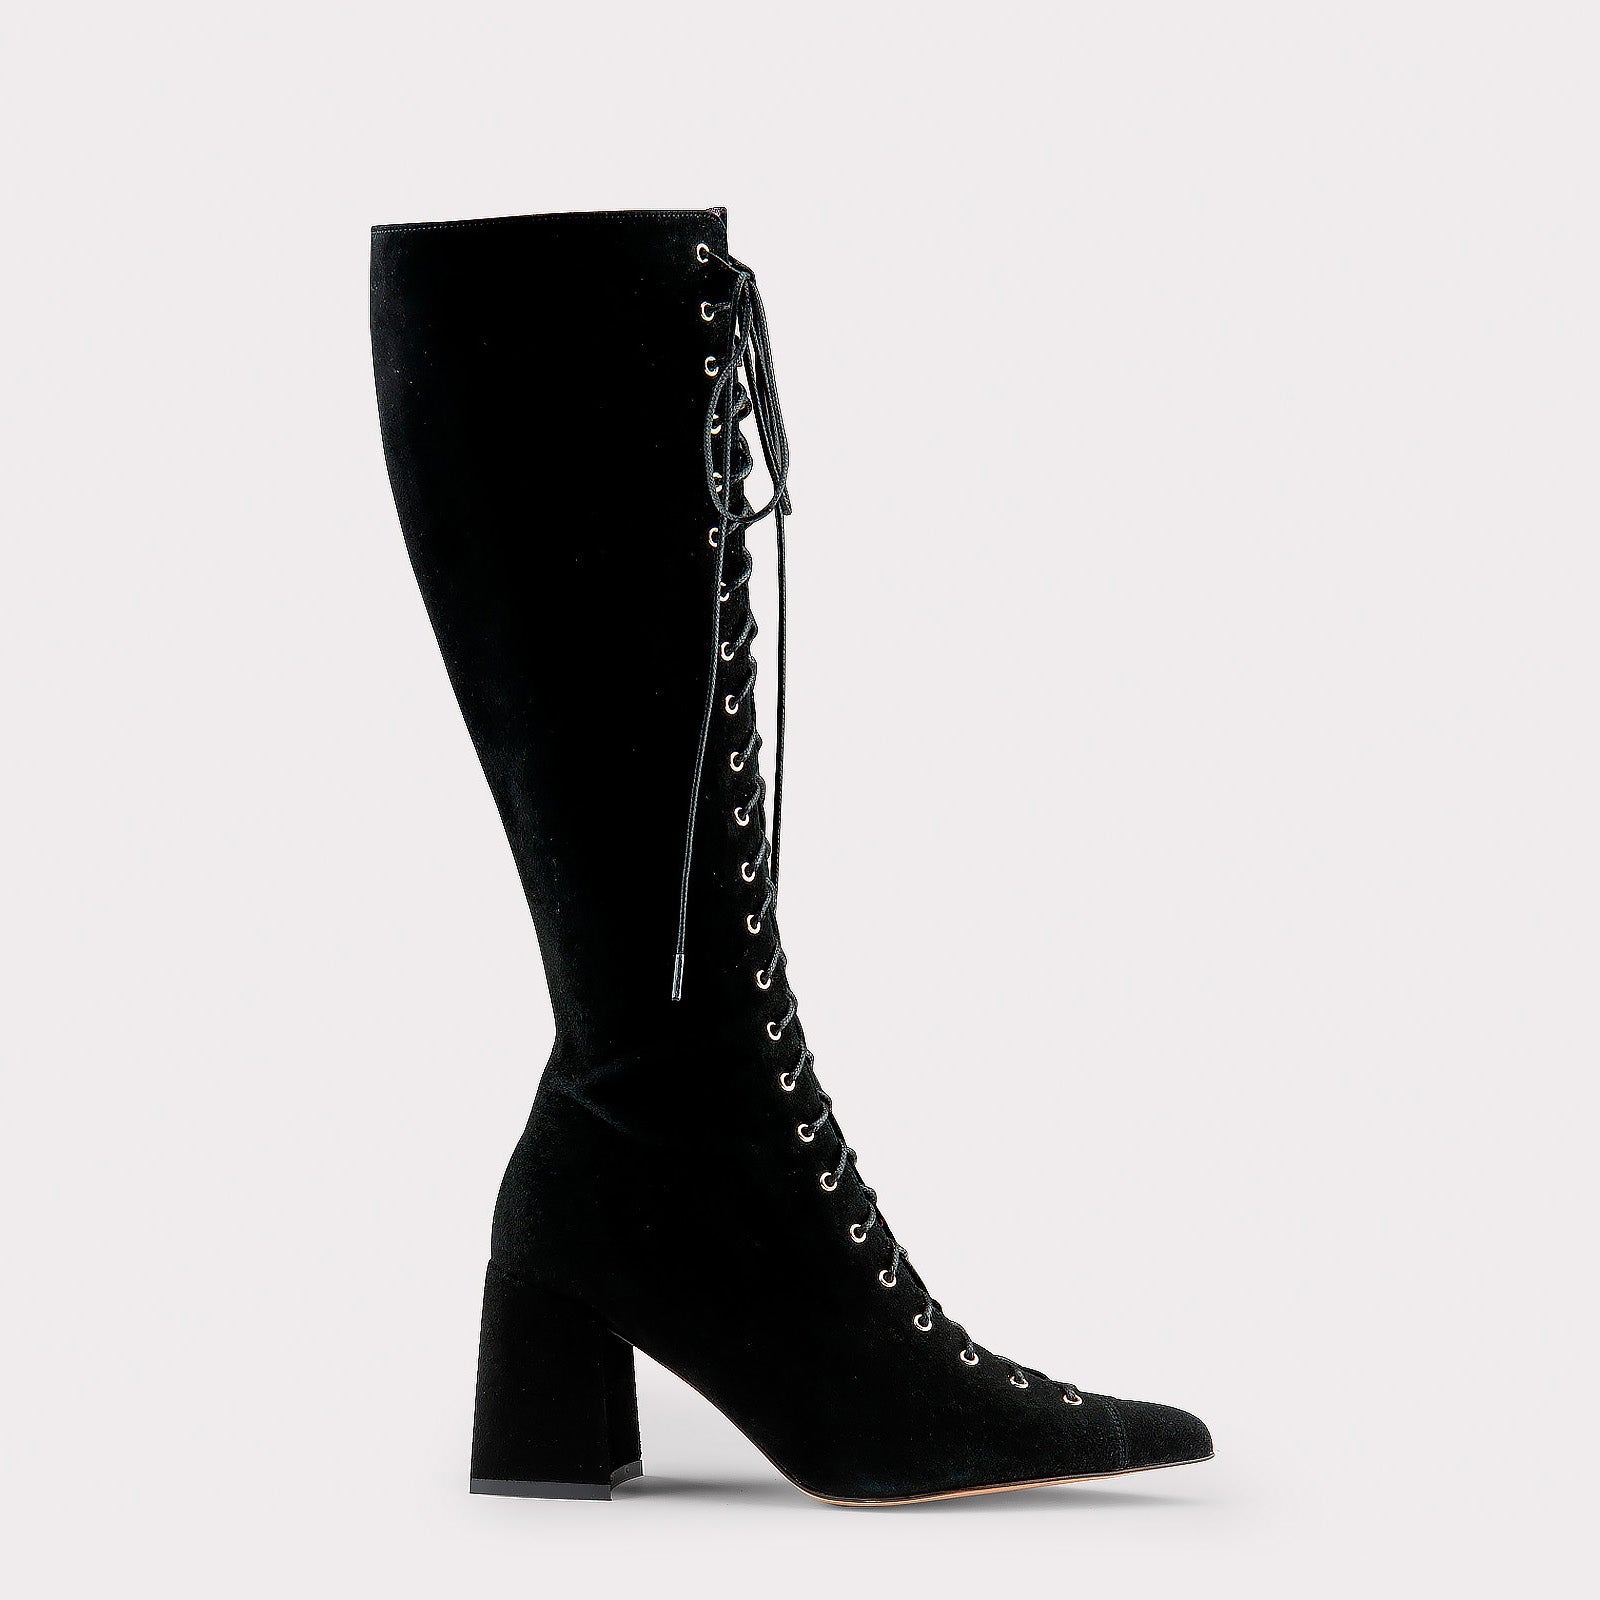 MONICA 03 BLACK SUEDE LEATHER BOOTS